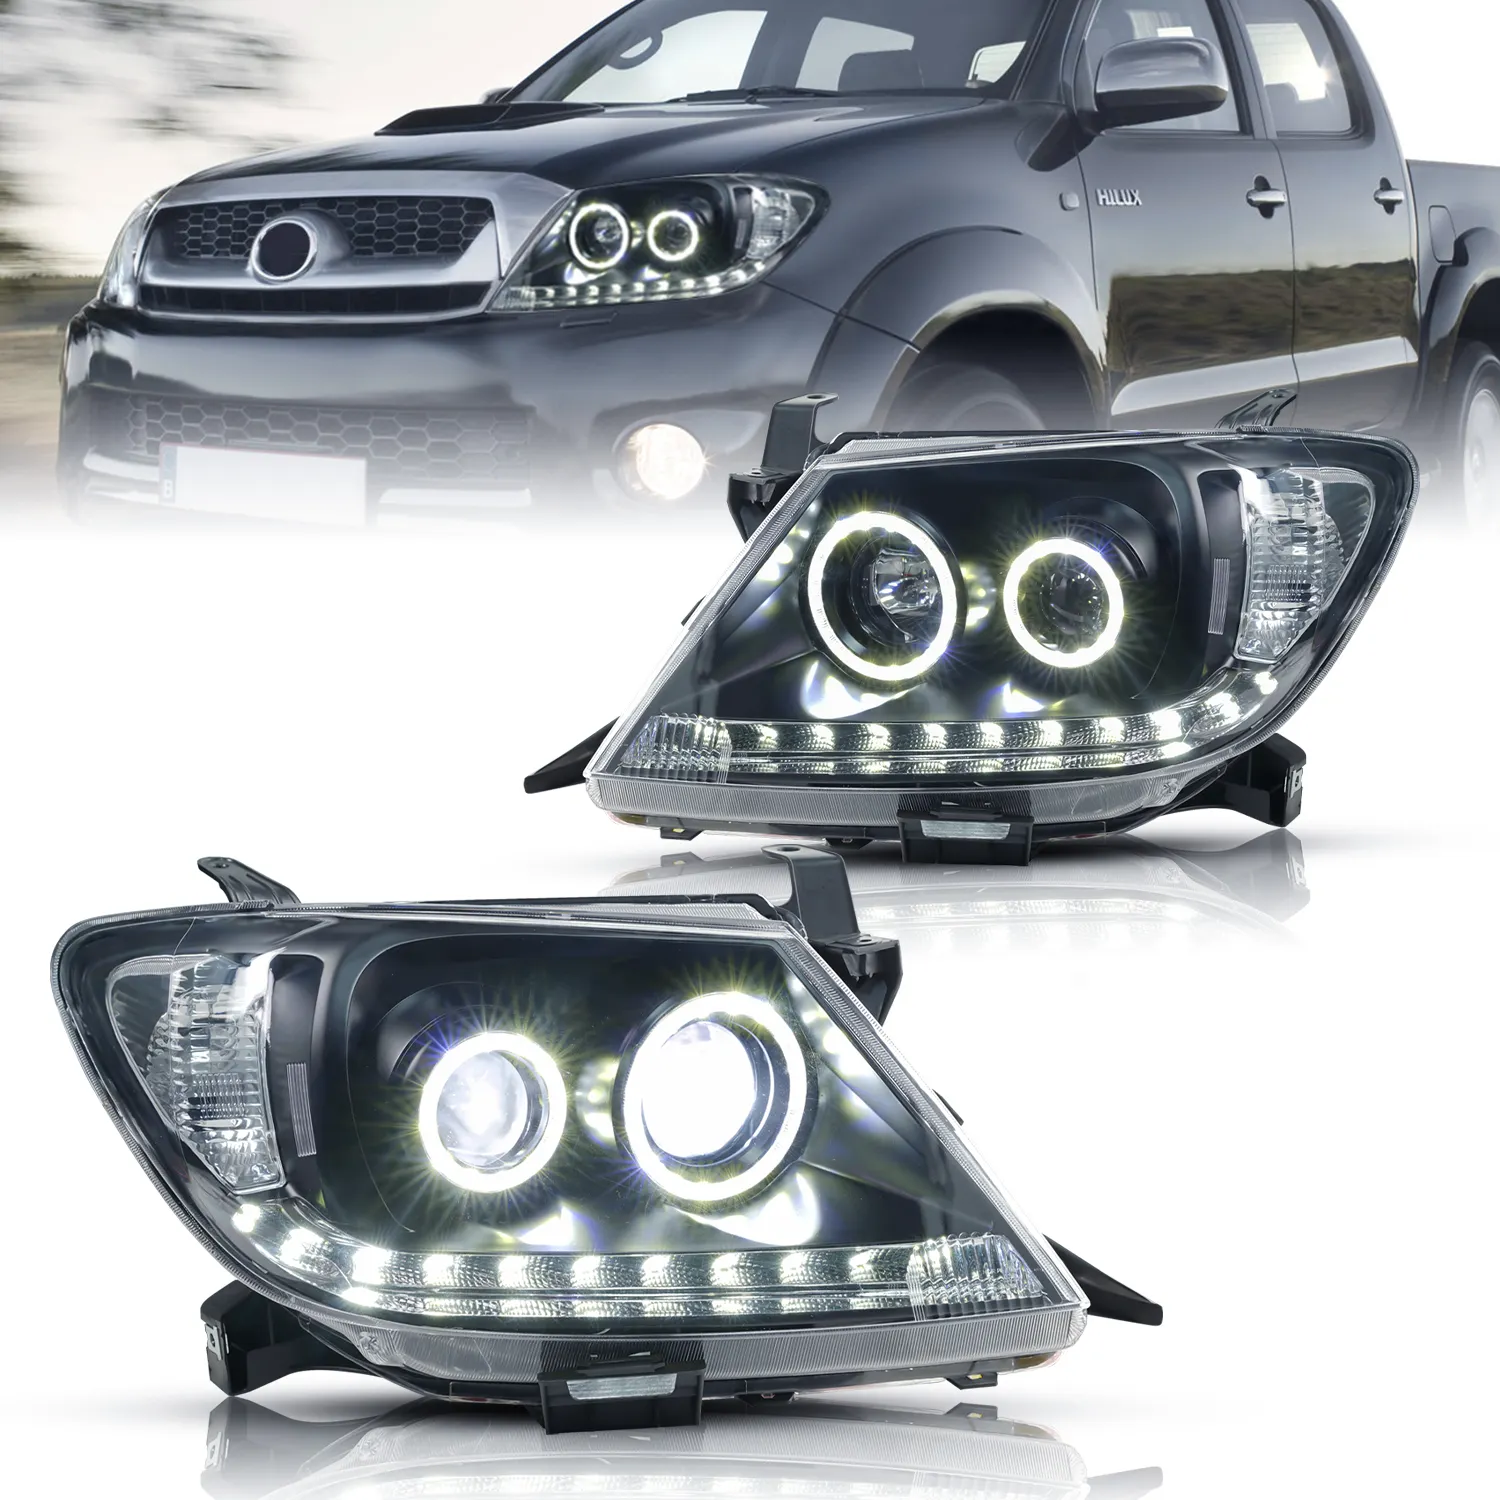 Archaic Led Car Front Lamp DRL With High Beam Low Beam Head Lamp For Toyota Hilux Vigo Revo Rocco 2005-2011 Headlights